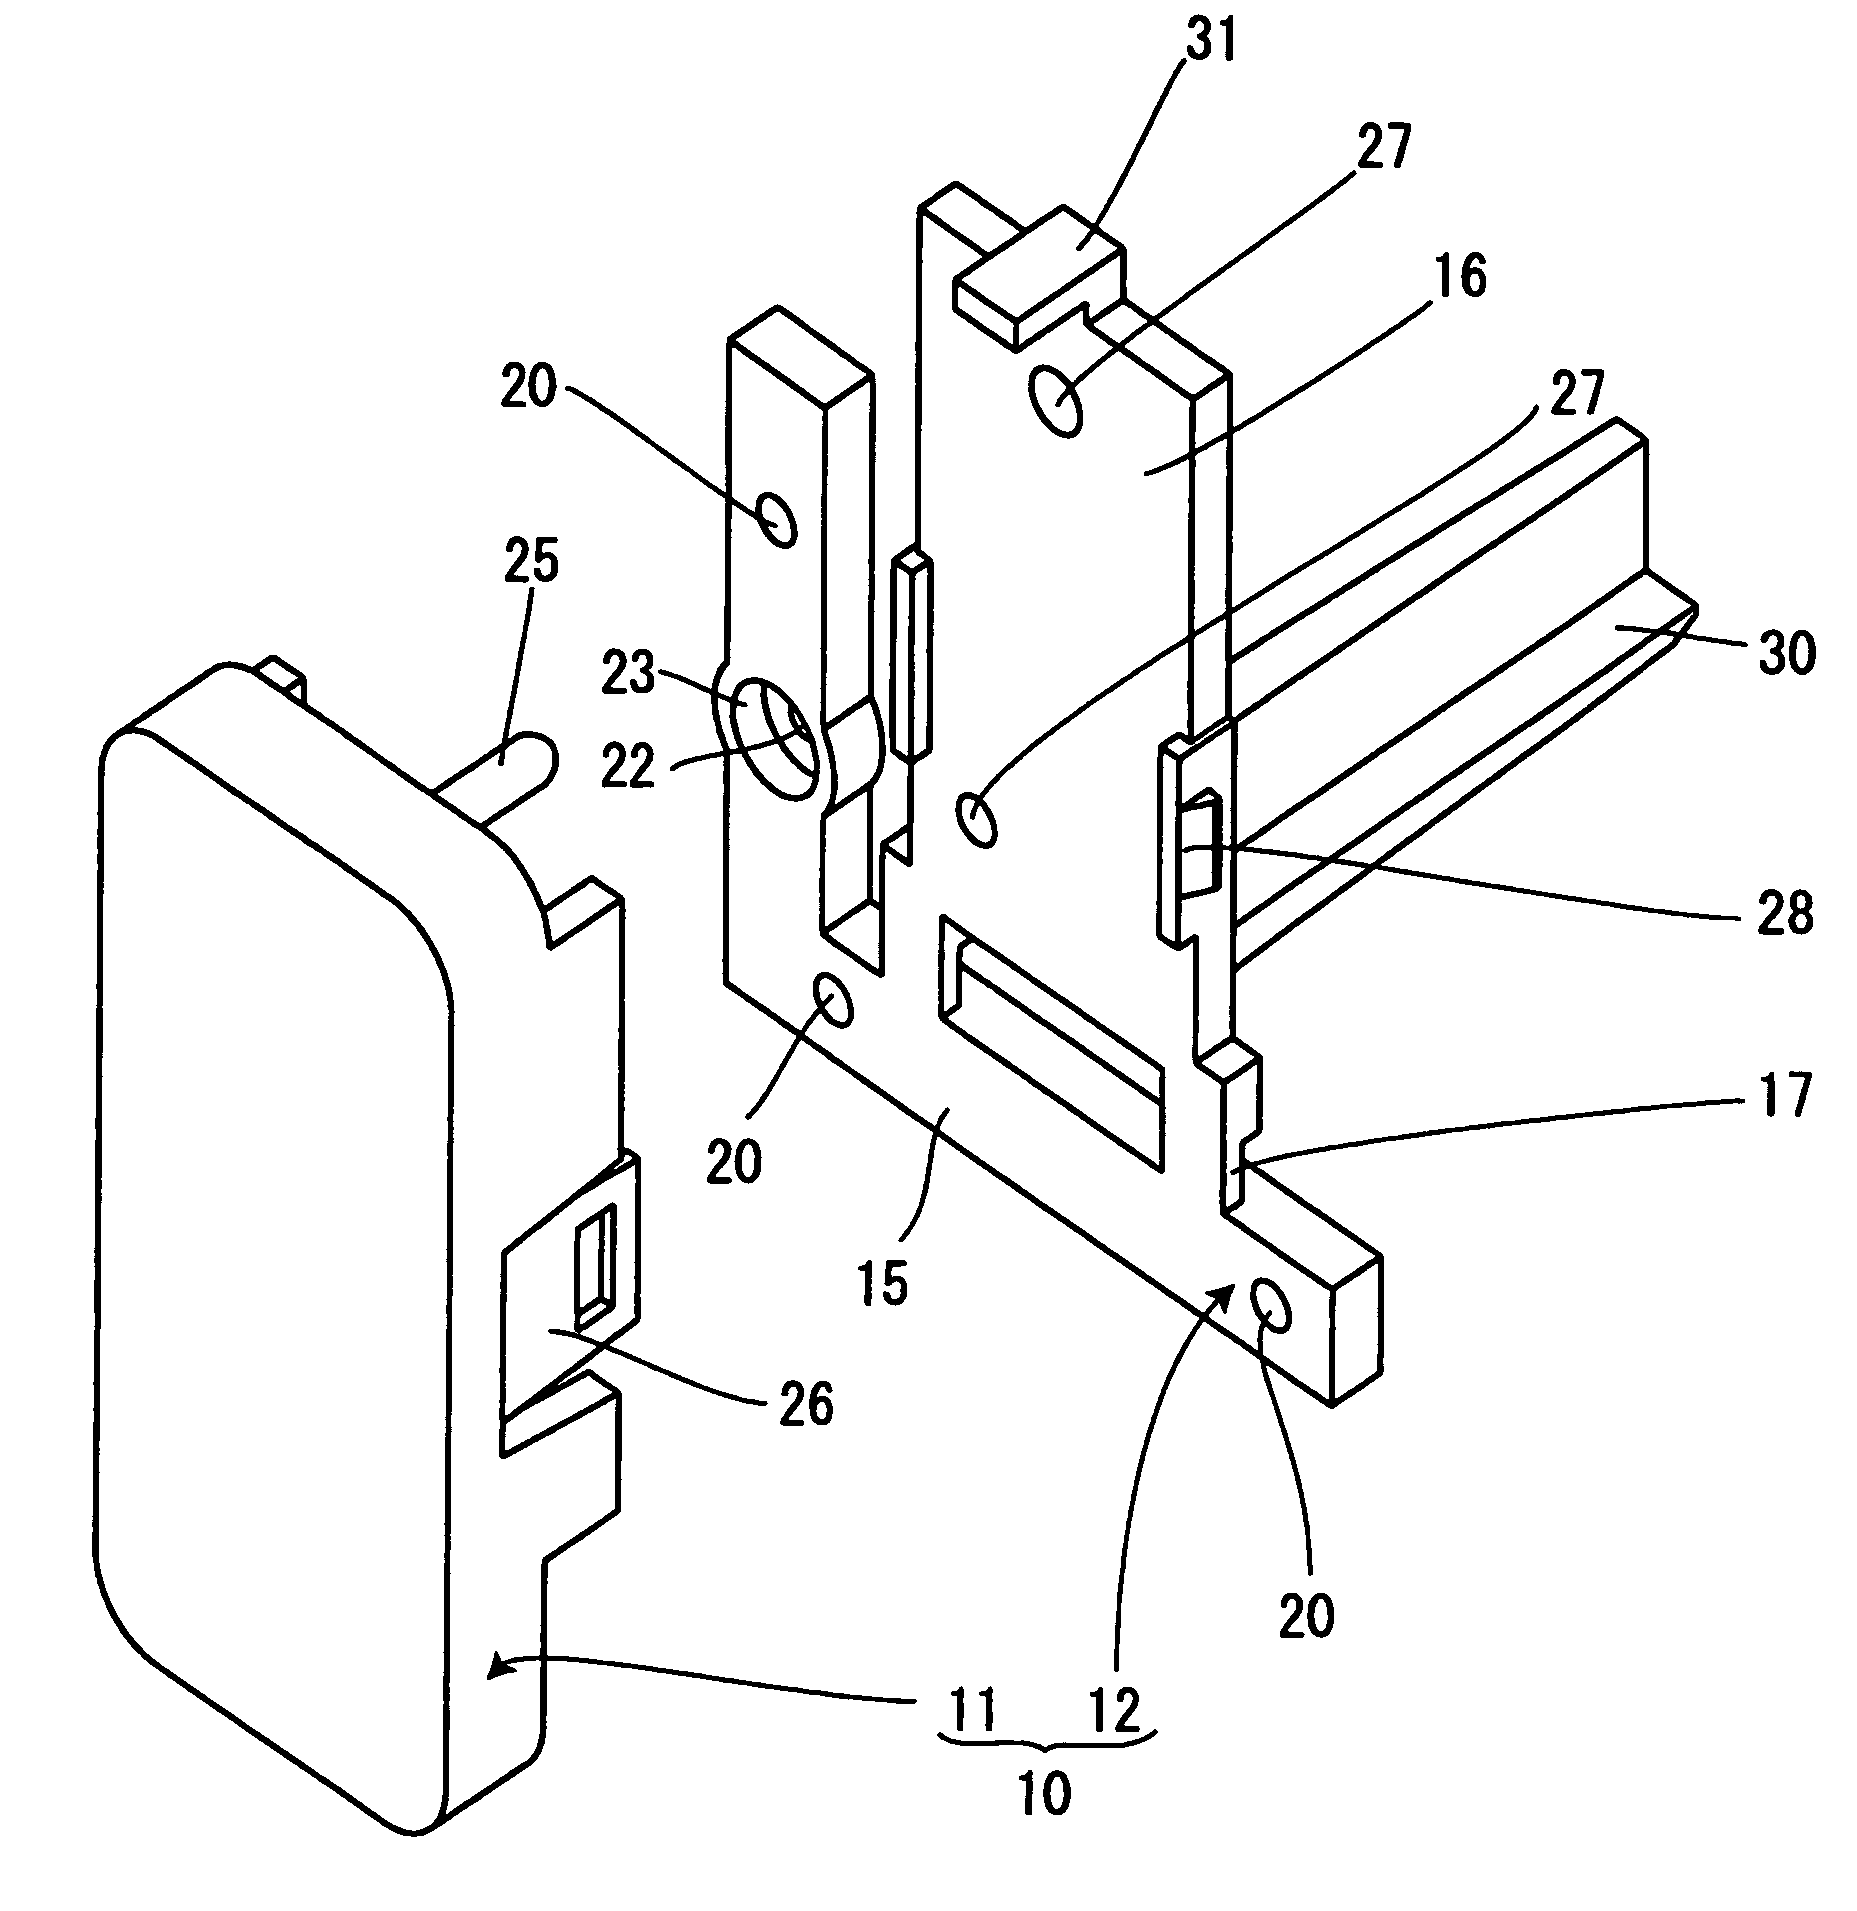 Electronic device with manual operation button